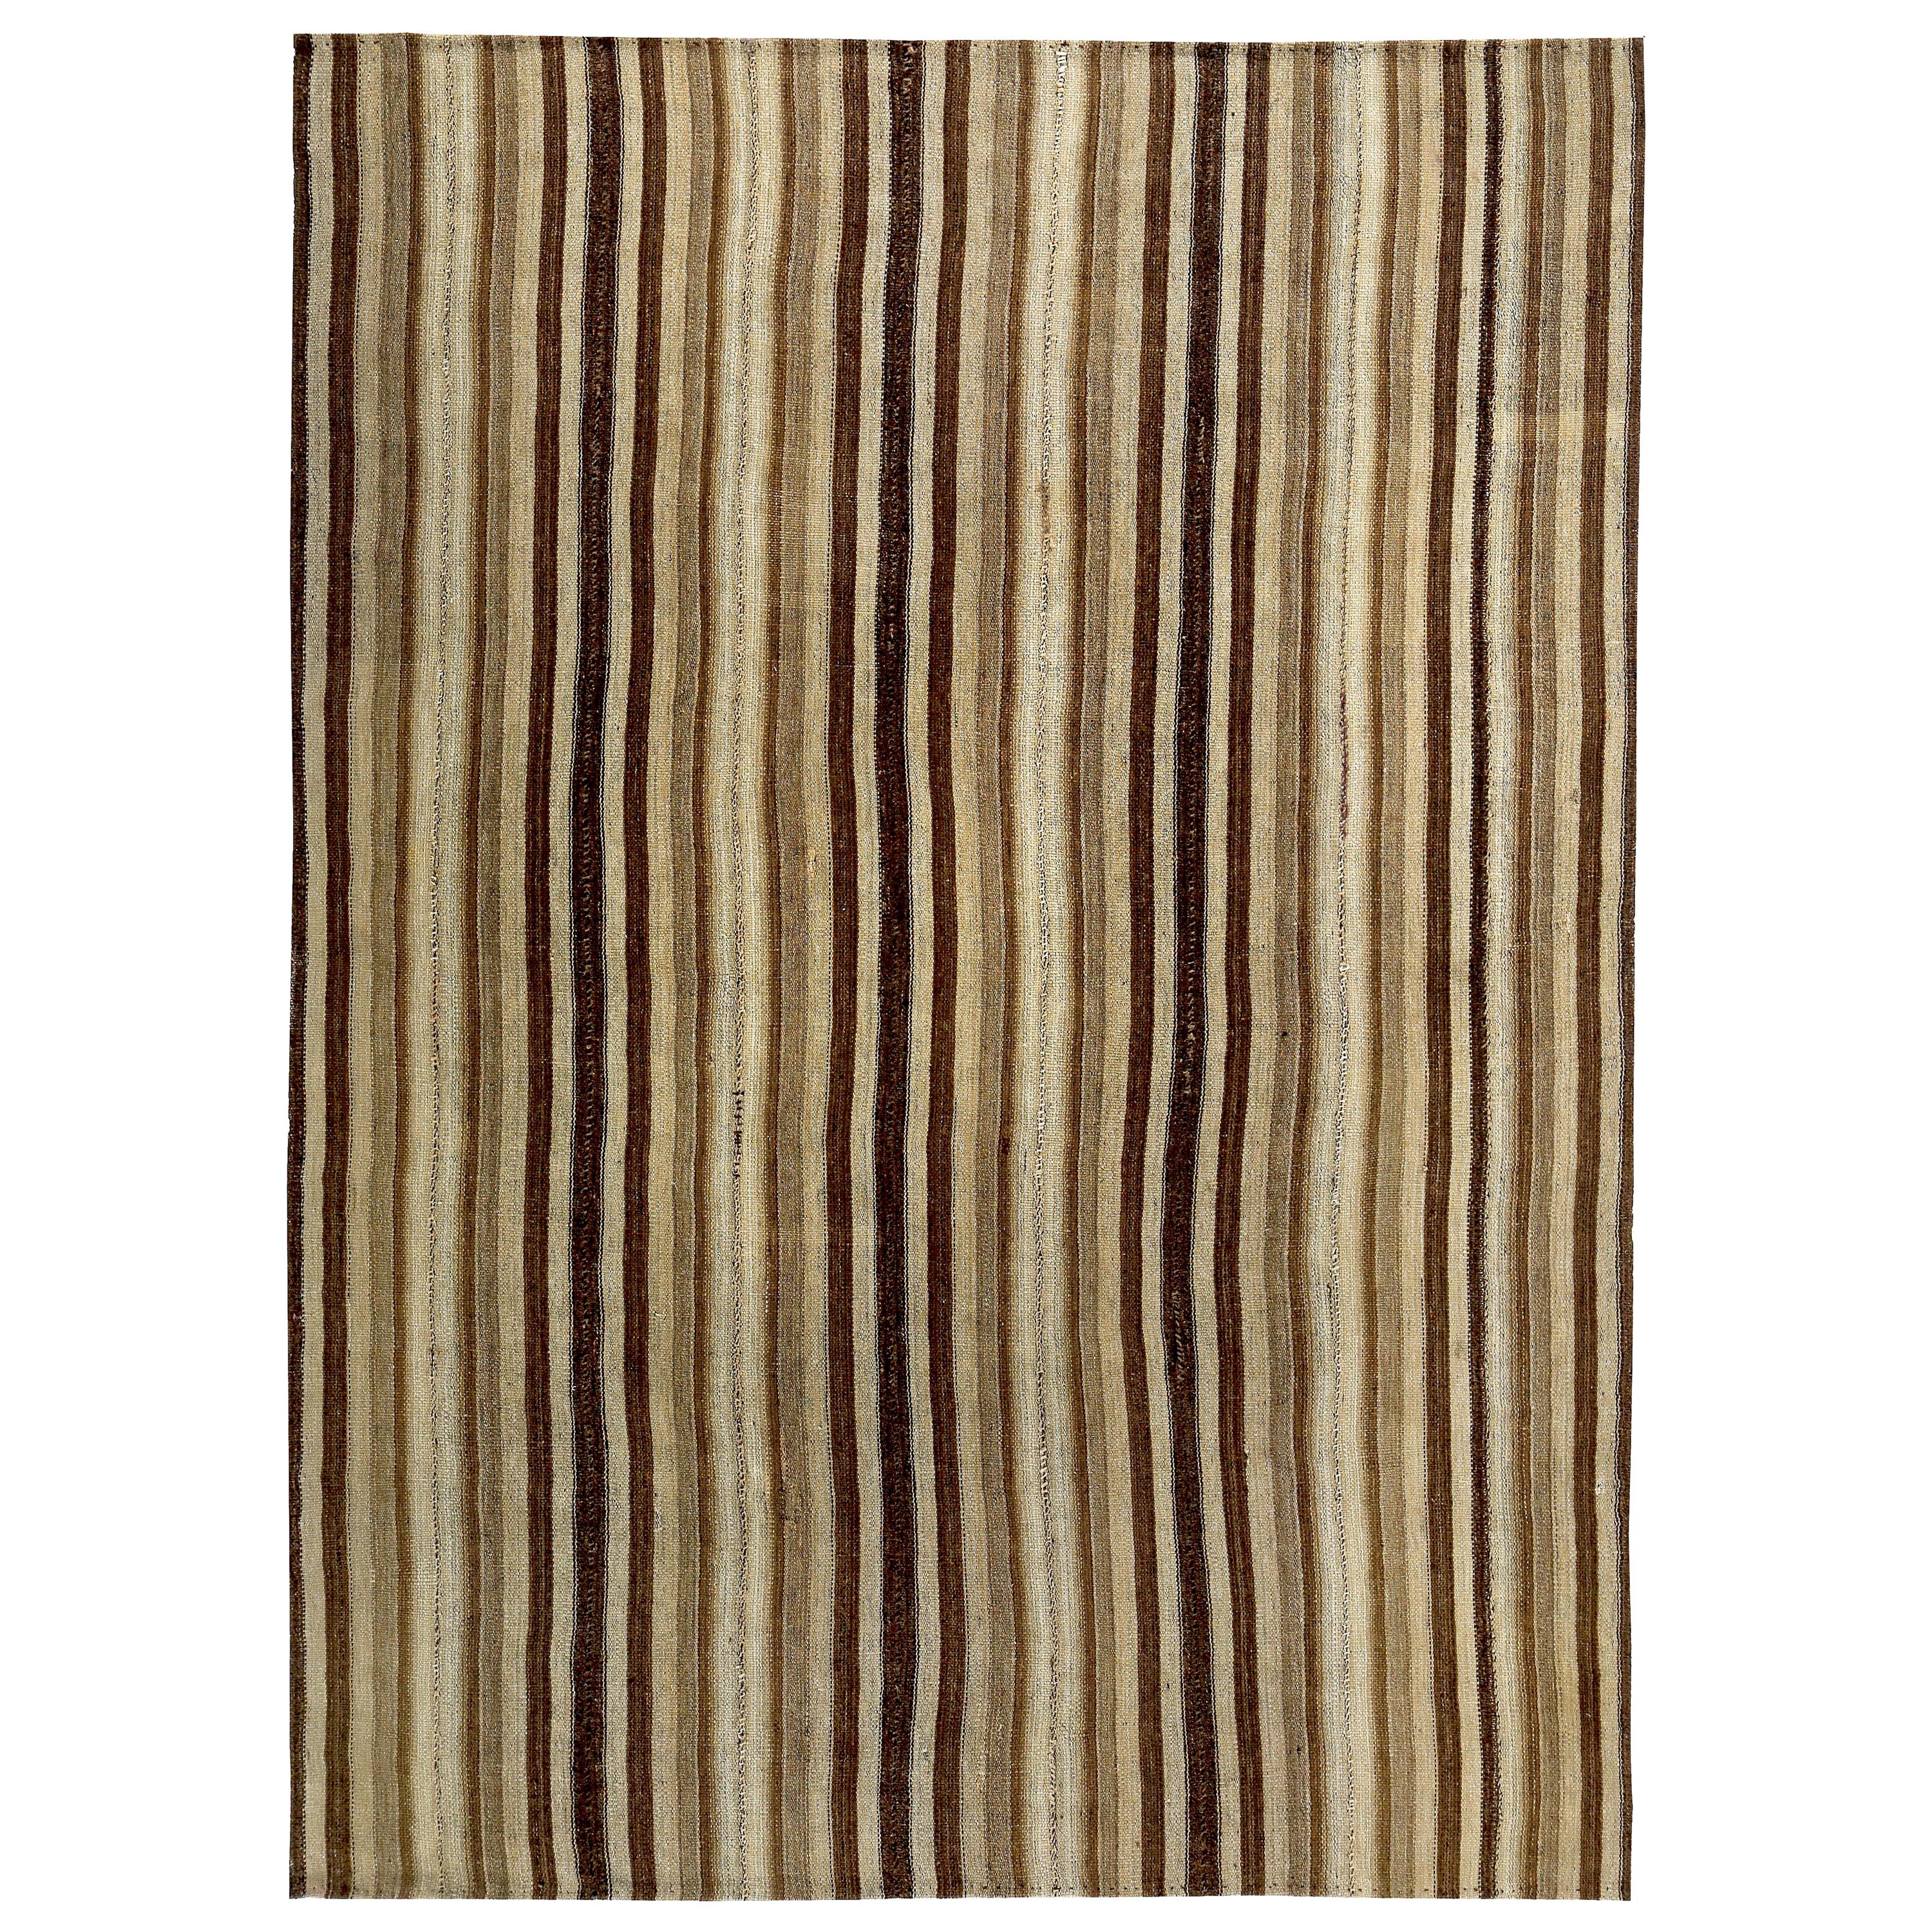 Contemporary Turkish Kilim Rug with Black and Brown Stripes on Beige Field For Sale